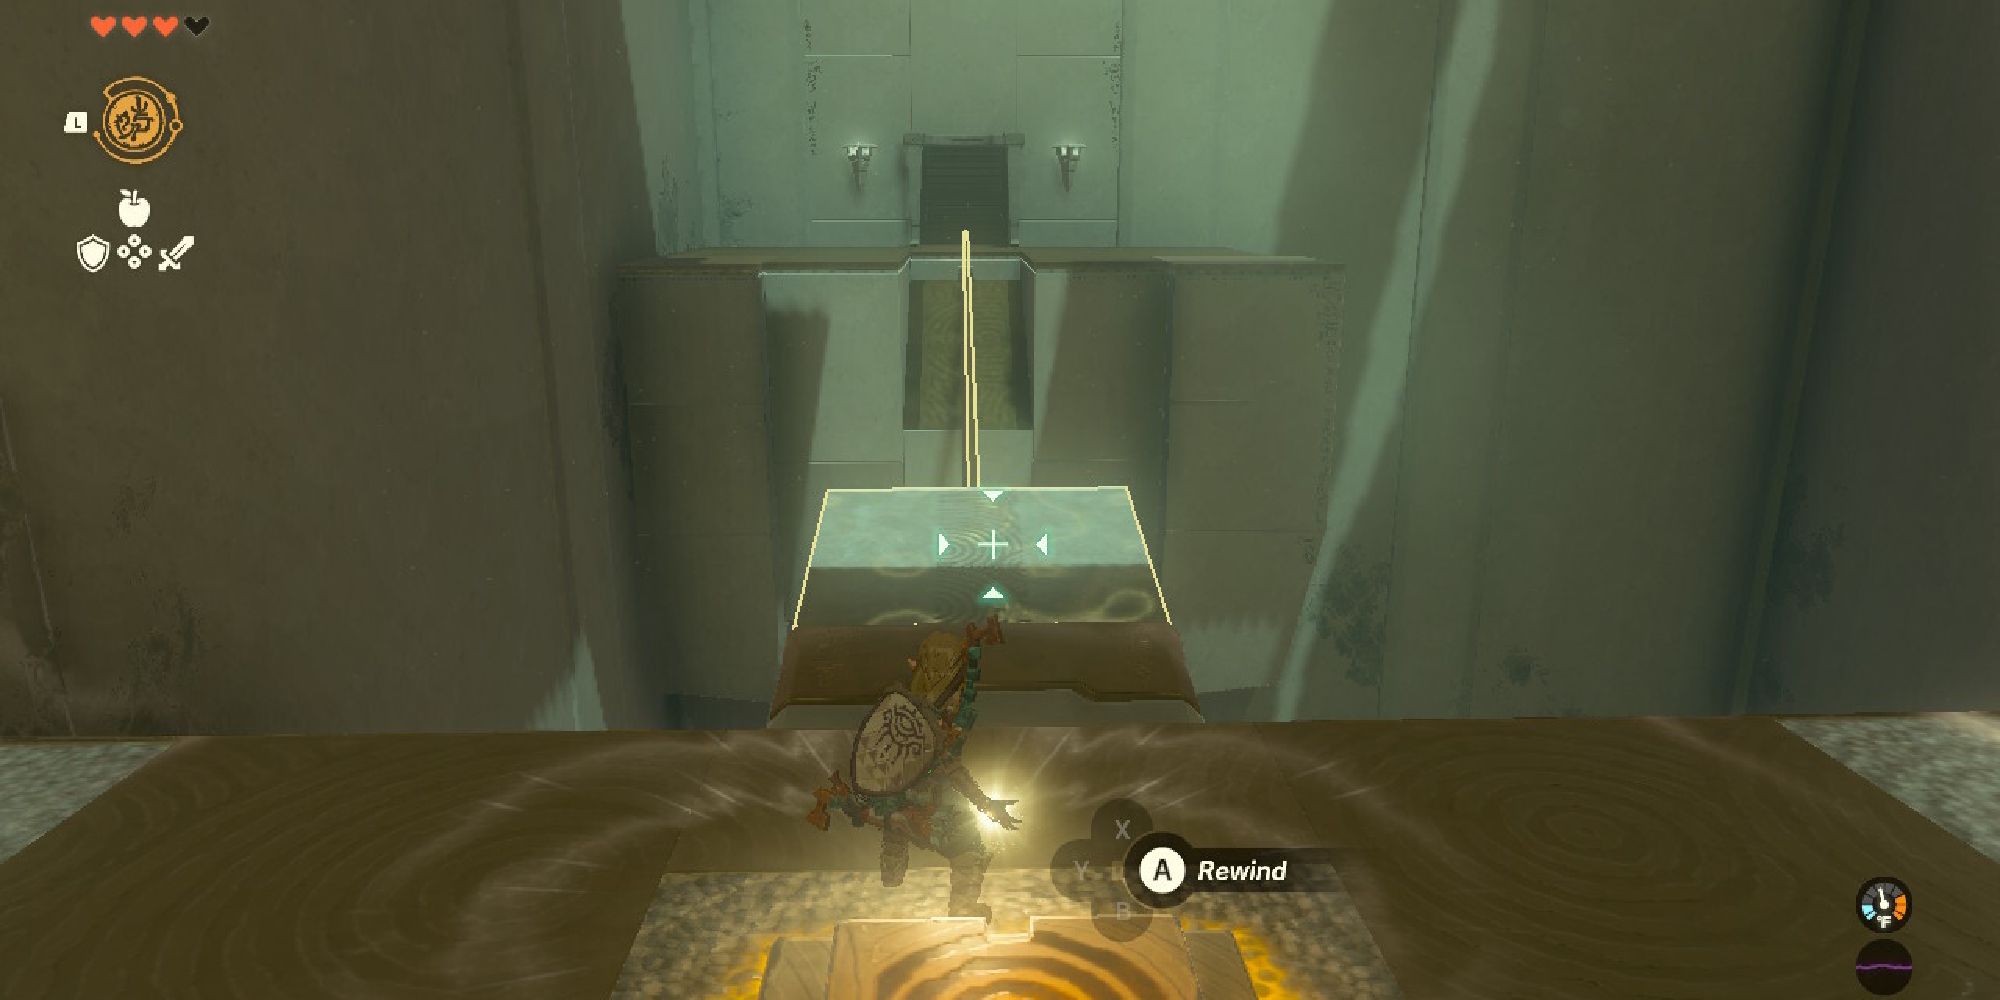 Link in the process of using the rewind ability to solve shrine puzzles. 